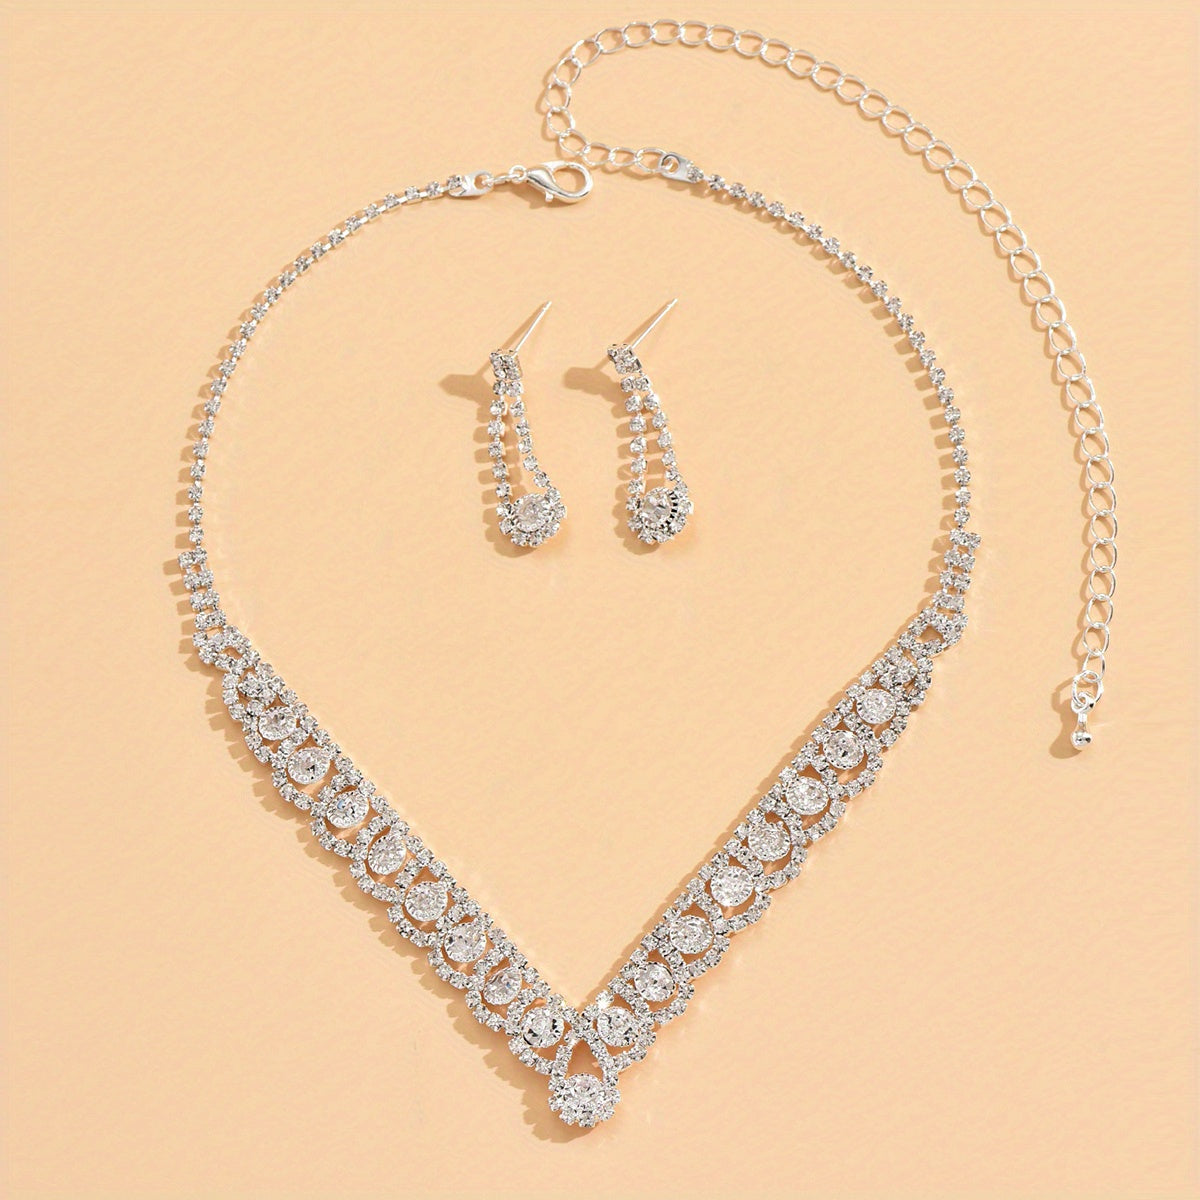 Elegant Rhinestone V-Shaped Necklace and Earrings Set - Perfect for Parties and Special Occasions